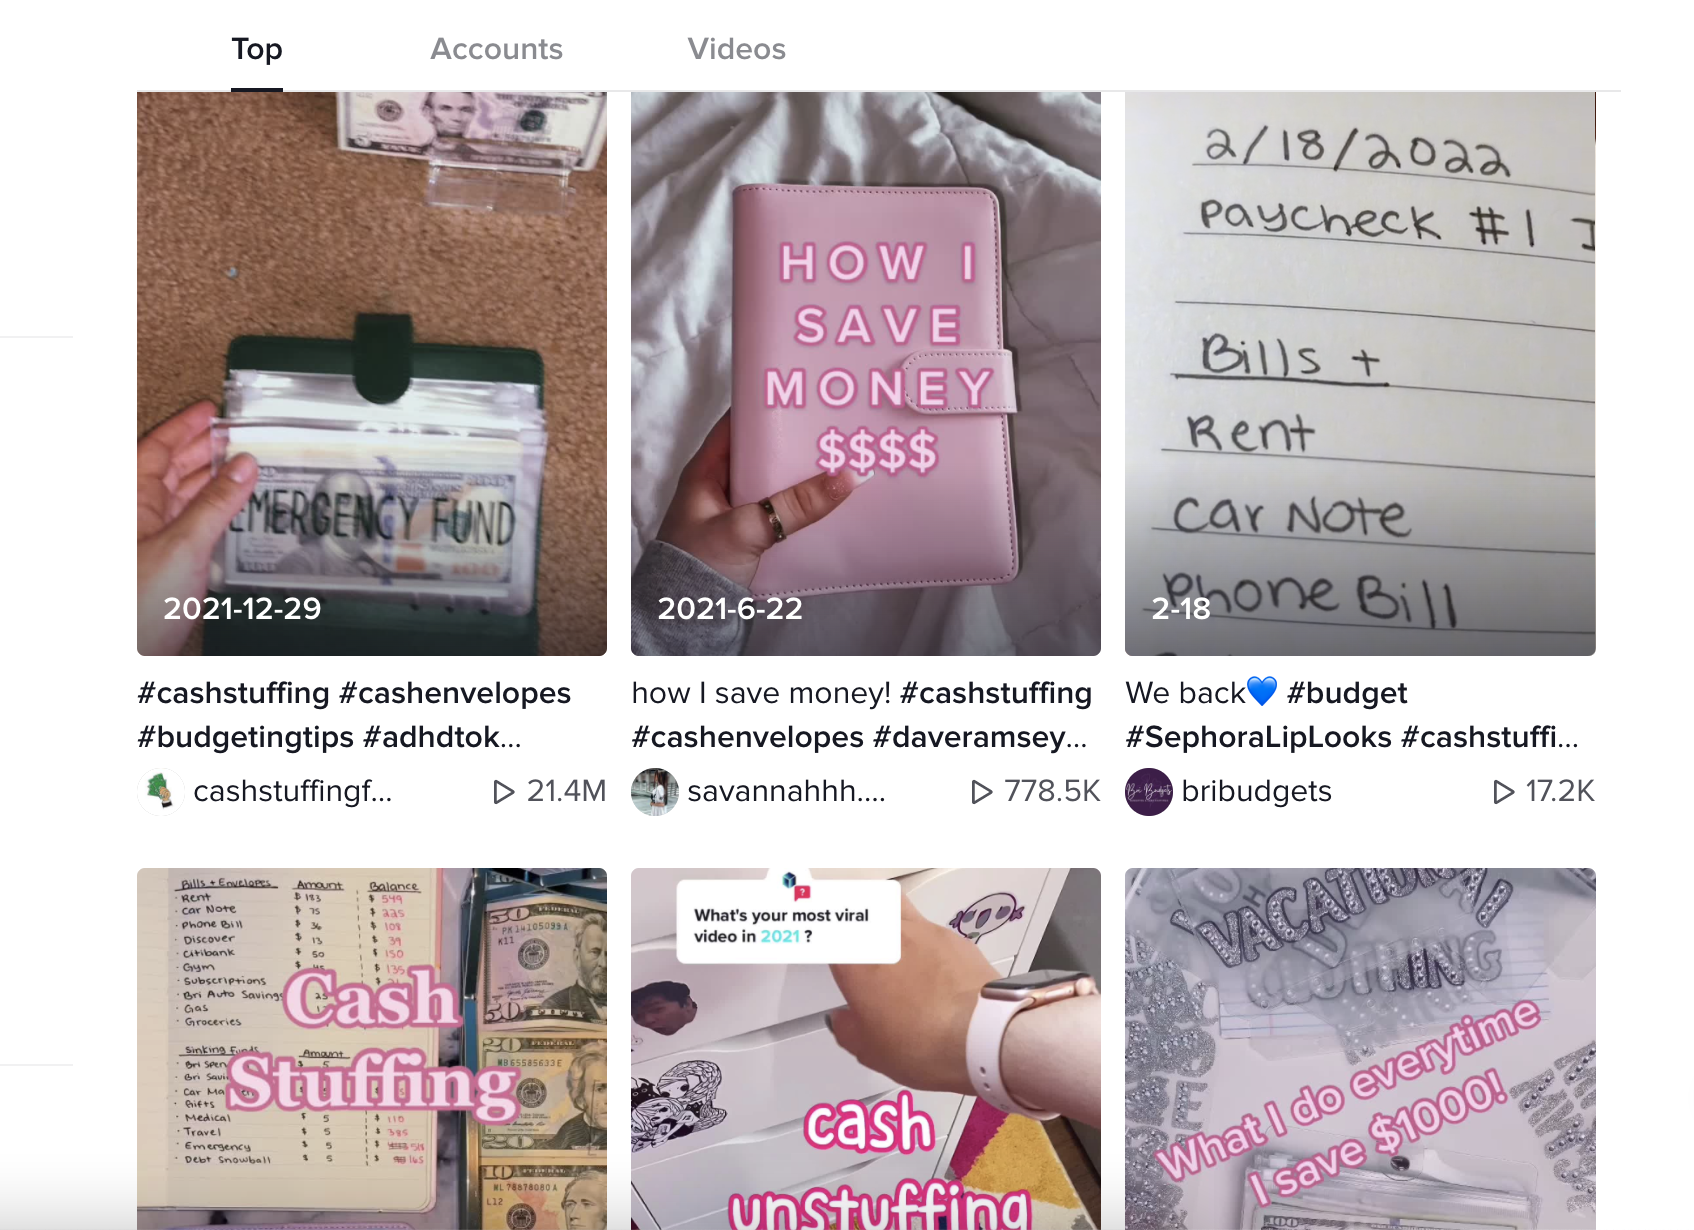 Cash Stuffing Is Hot on TikTok — What Is It and Does It Work?